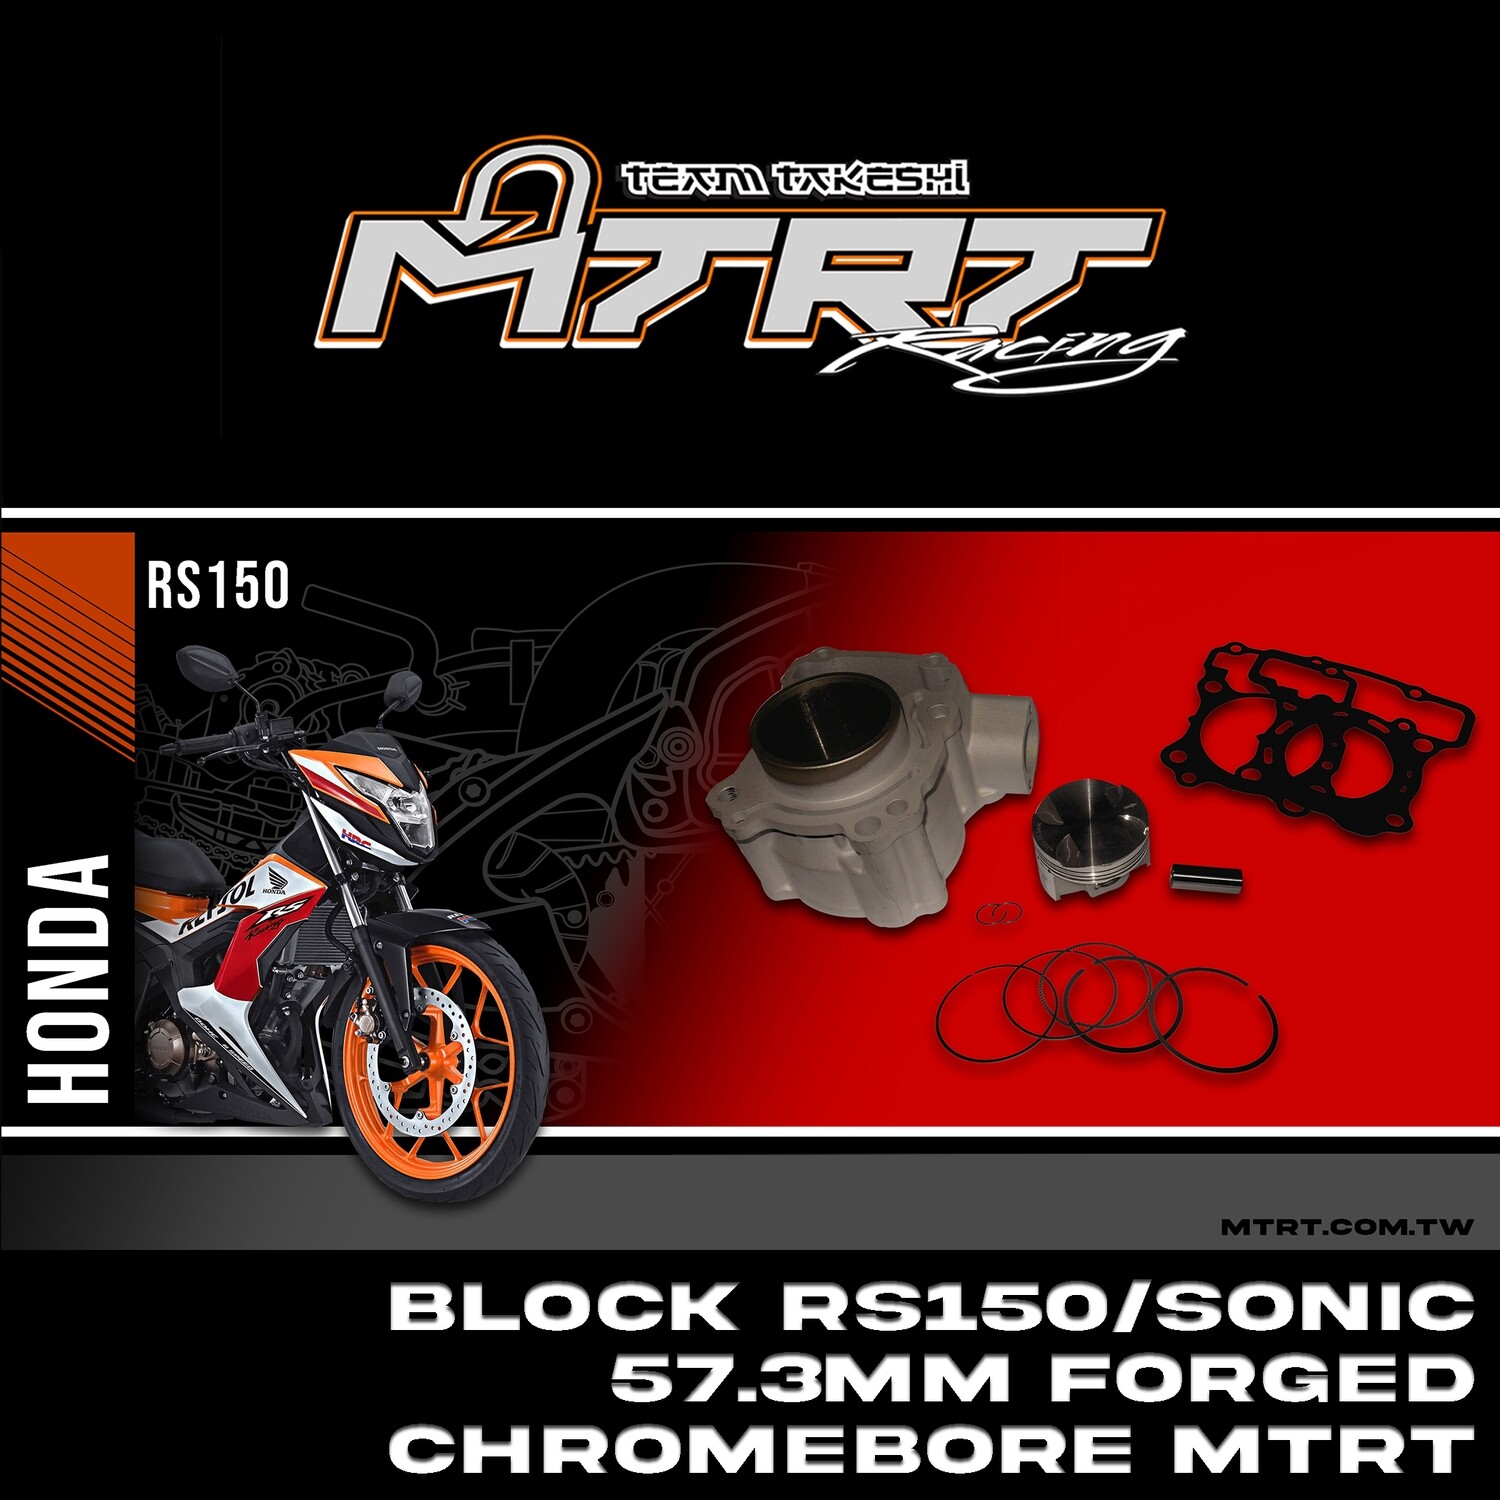 BLOCK RS150 / SONIC 57.3MM Chromebore Forged MTRT